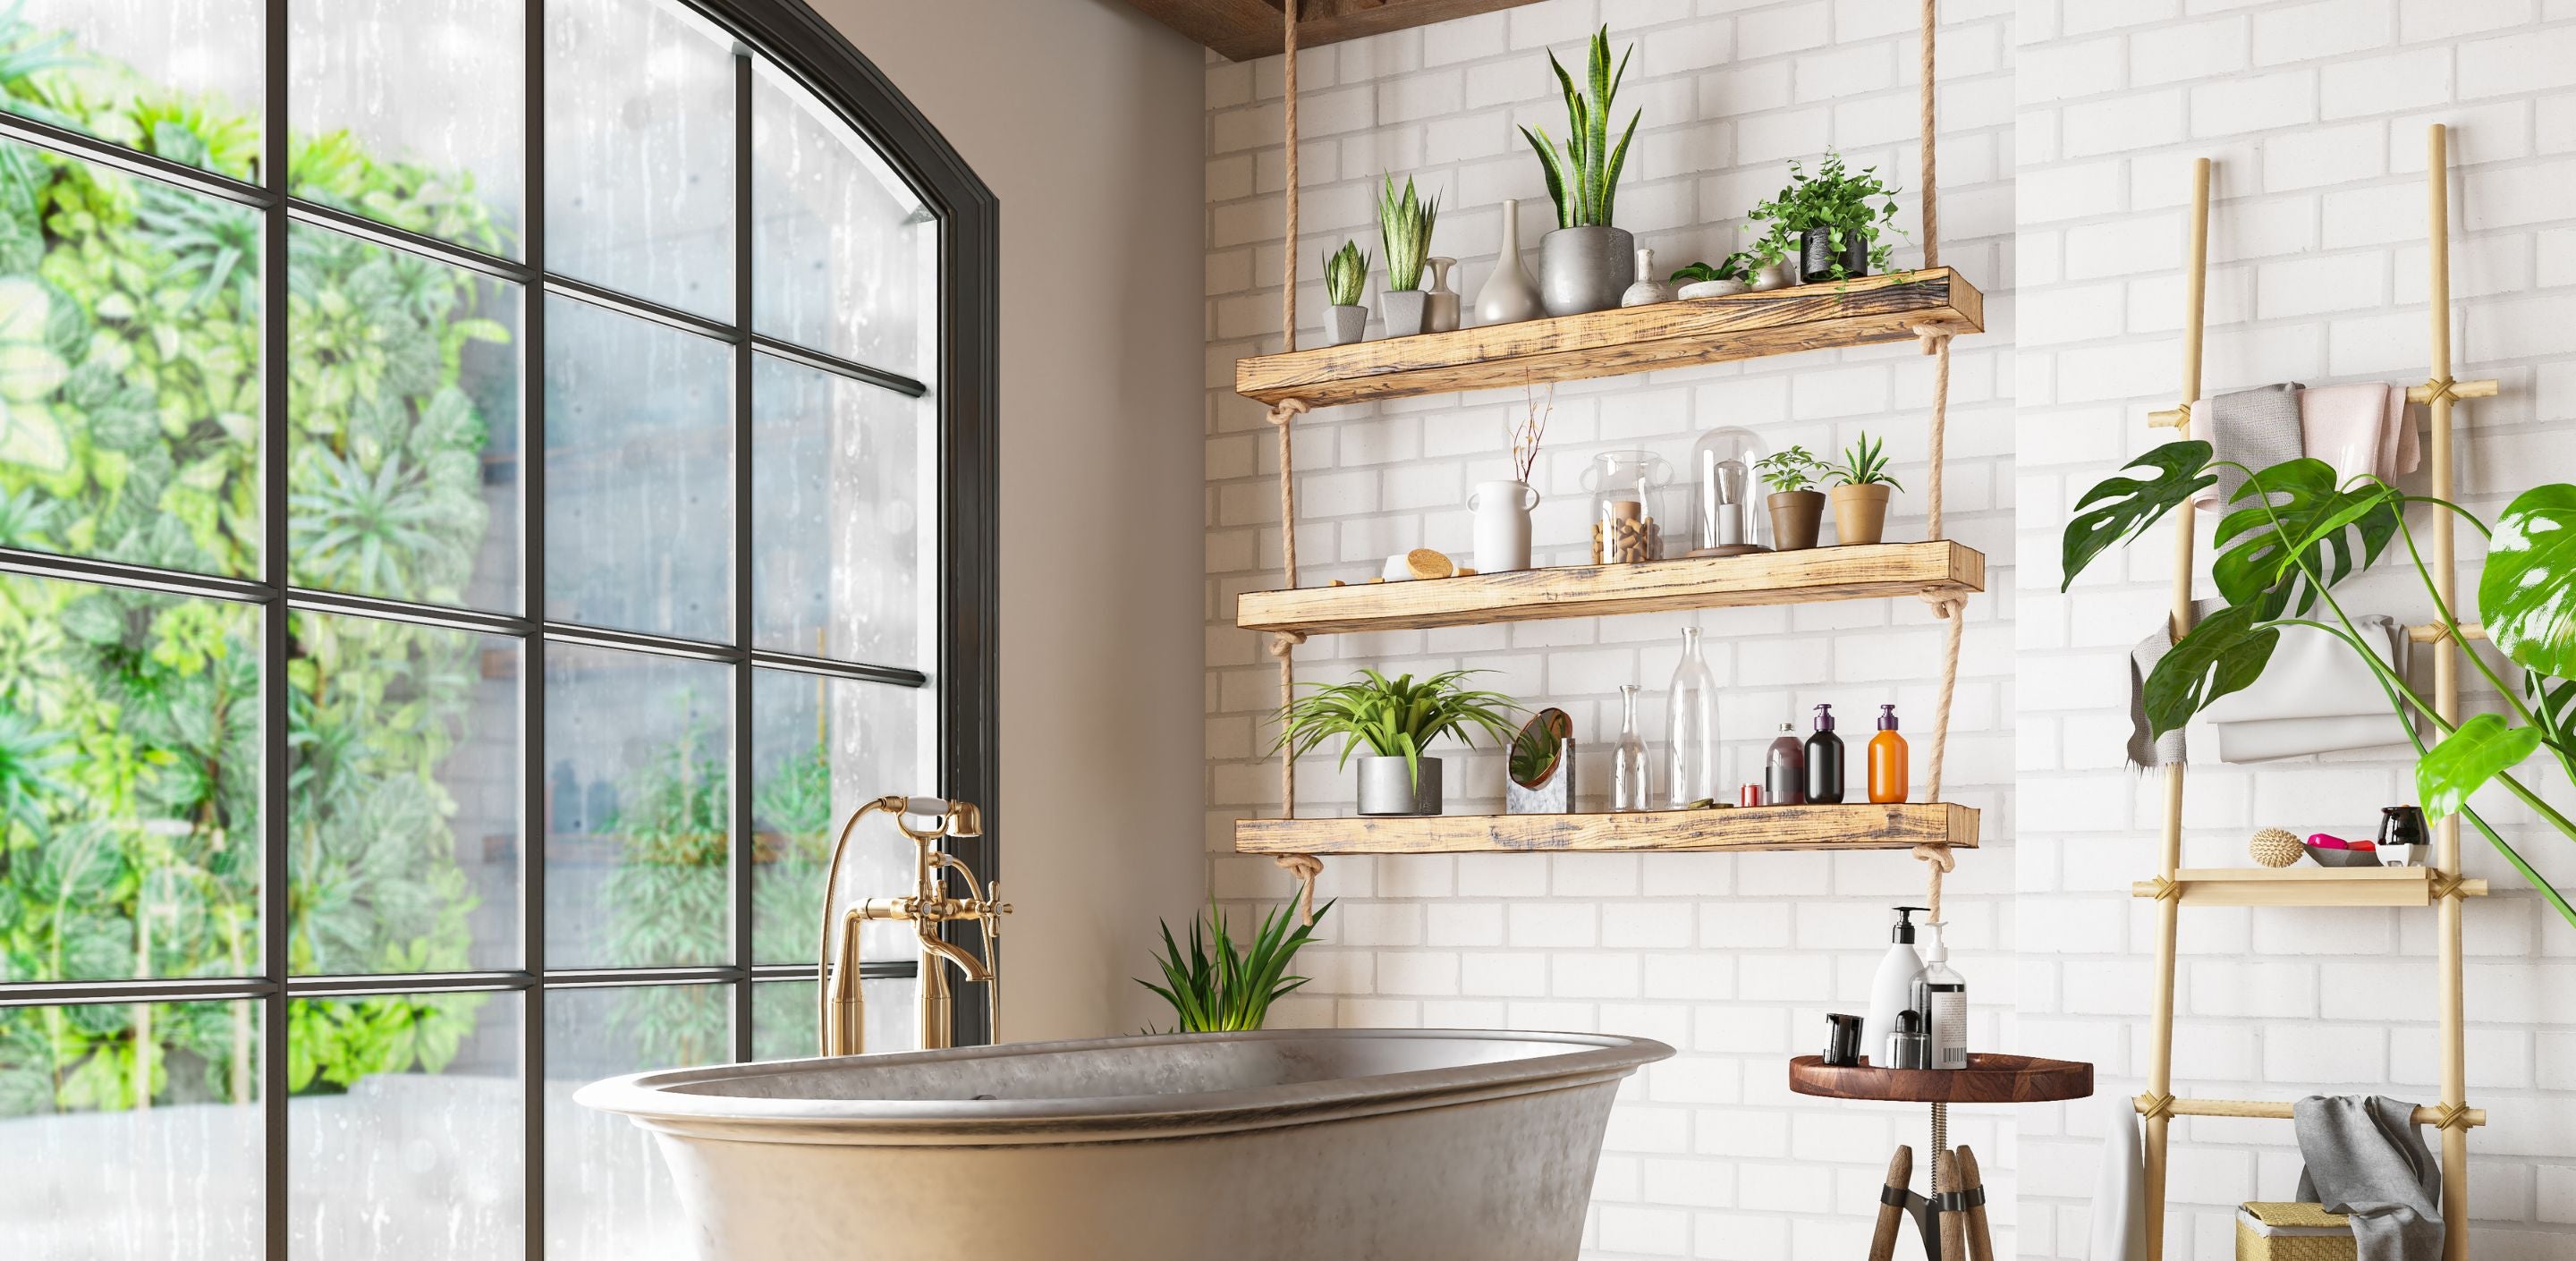 Bathroom Trends for 2019